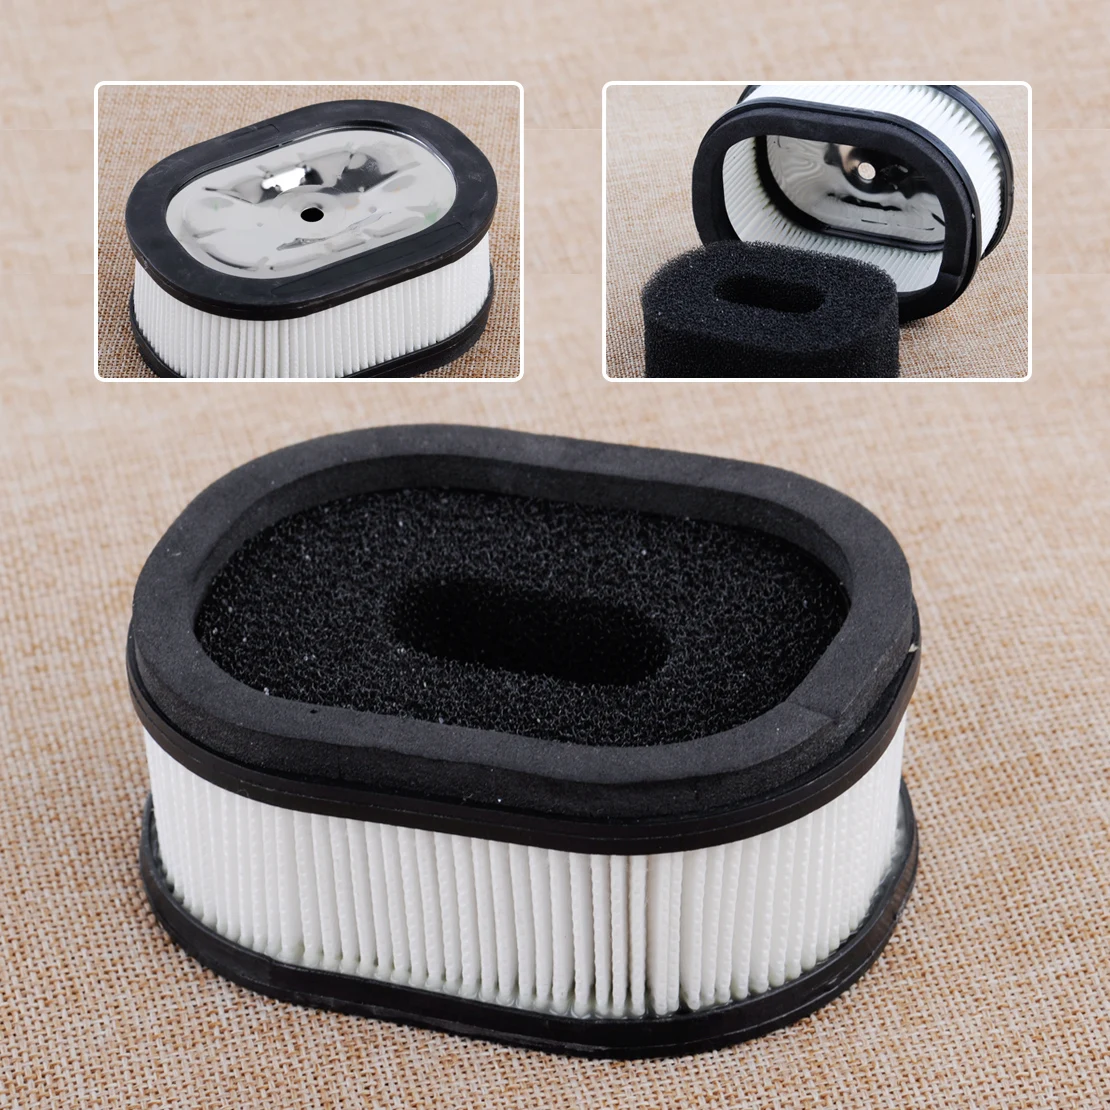 

LETAOSK New Air Filter with Sponge Fit for Stihl 066 065 MS660 MS650 Chainsaw Replacement 0000 120 1653